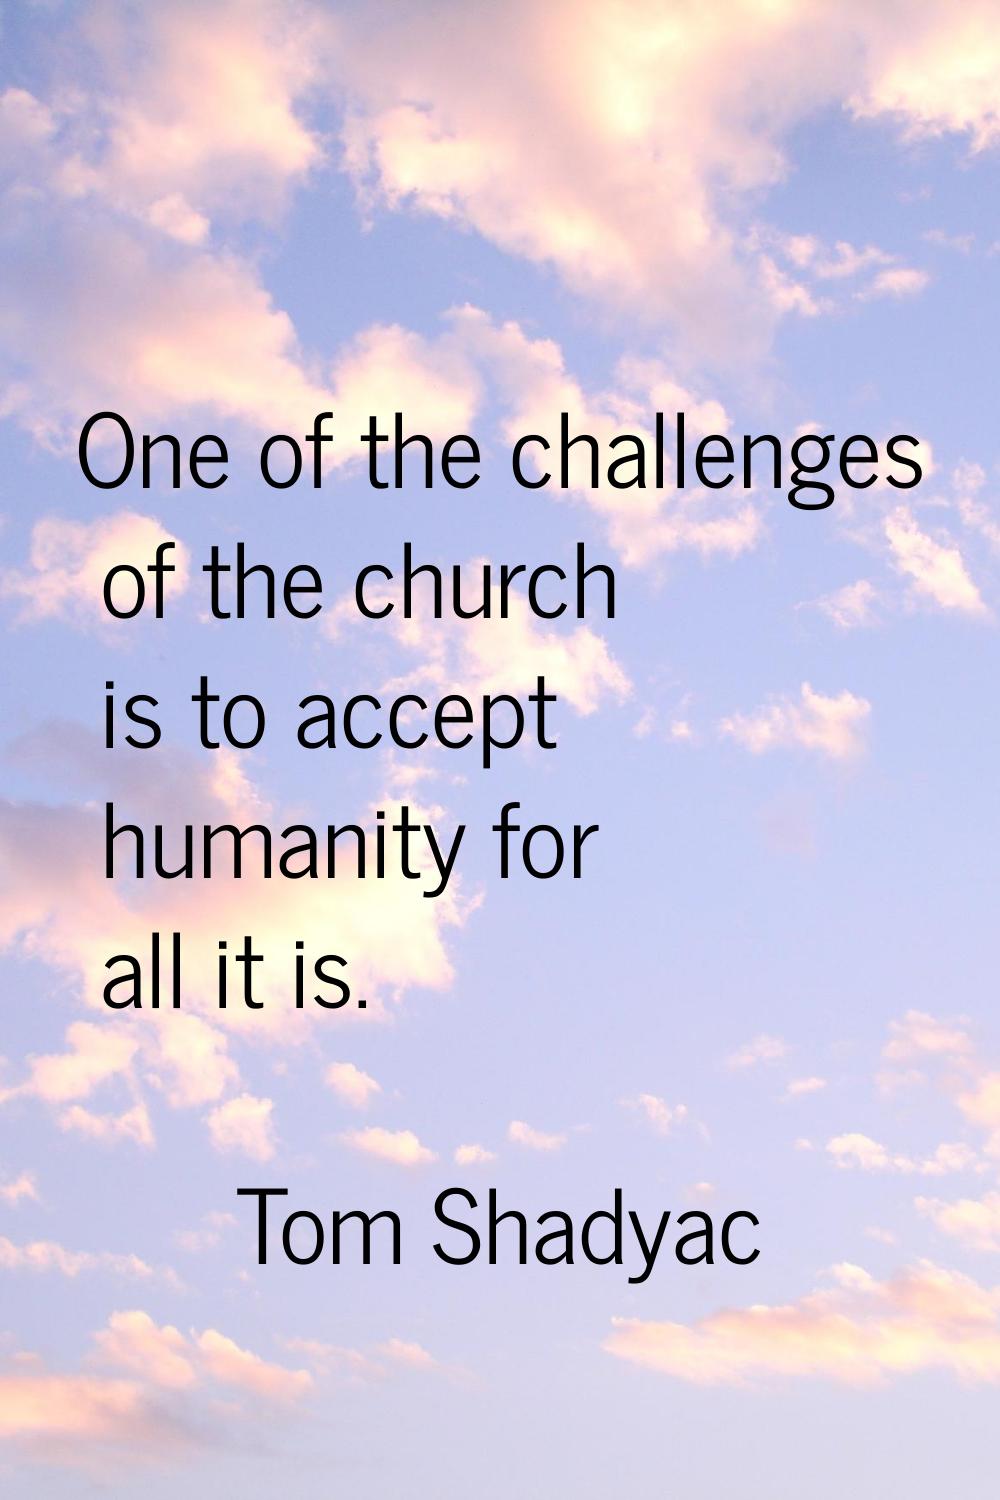 One of the challenges of the church is to accept humanity for all it is.